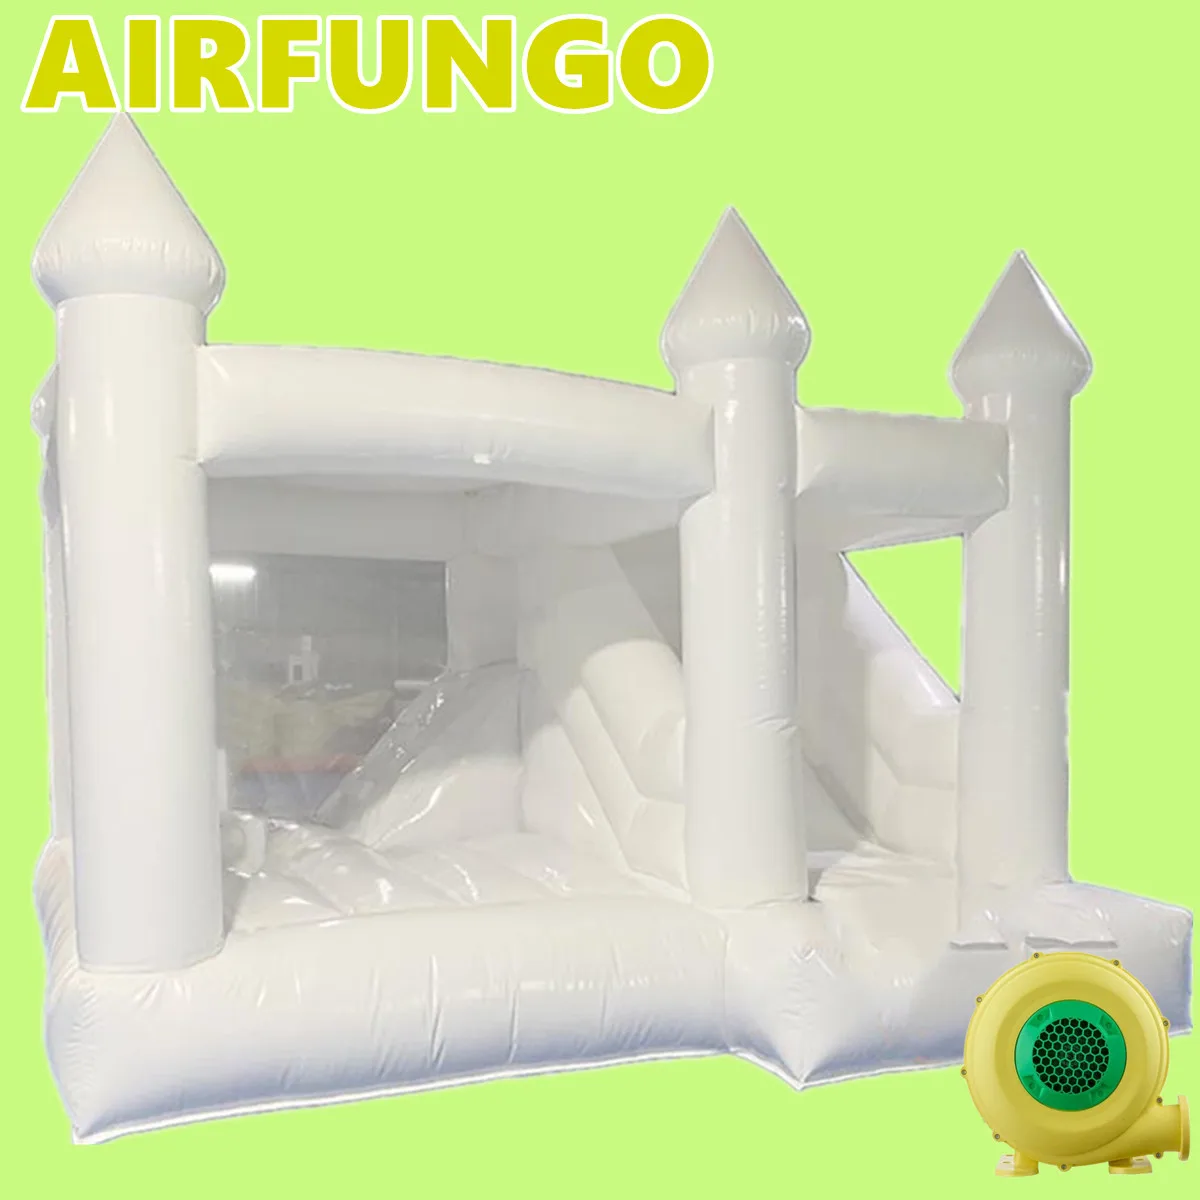 

Hot Sale Bounce House For Wedding Inflatable White Bounce Houses Wedding Bouncy Castle Air Bouncer Combo For Kids Adults Party